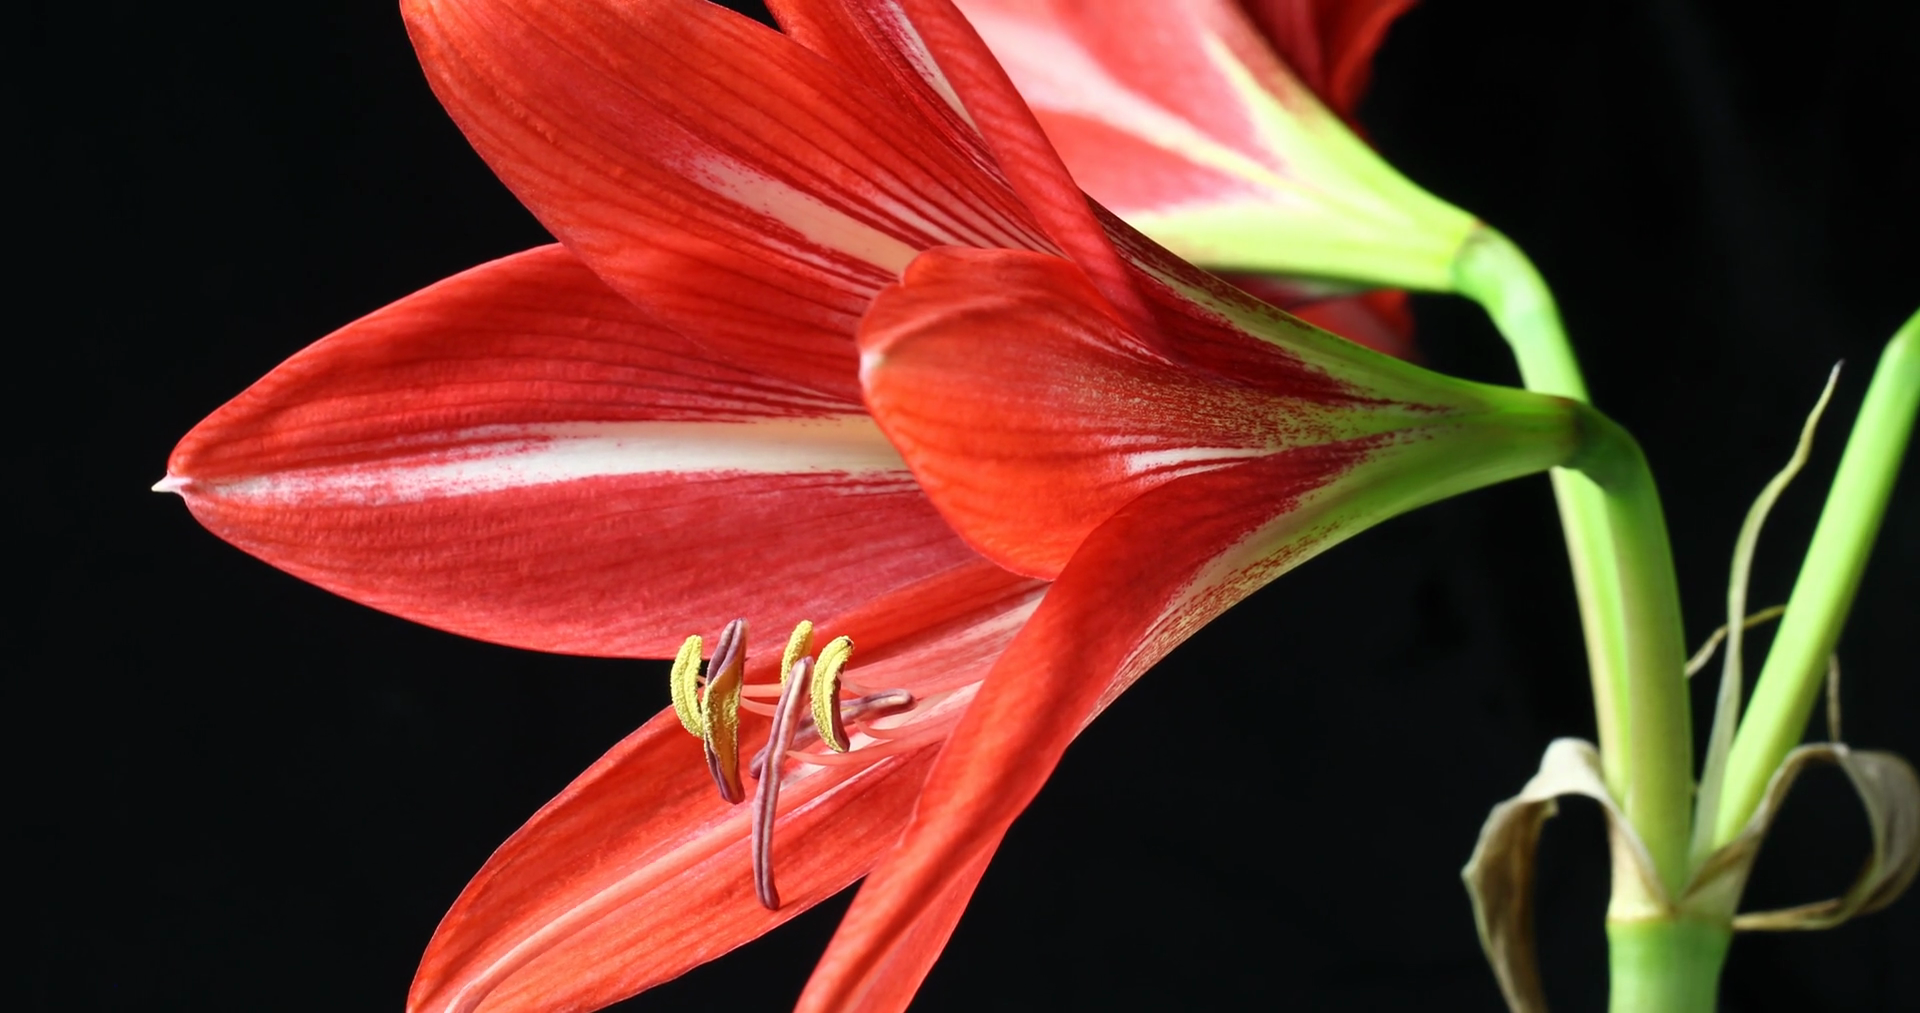 Plant flower opening time lapse Amaryllis blooming (Hippeastrum sp ...